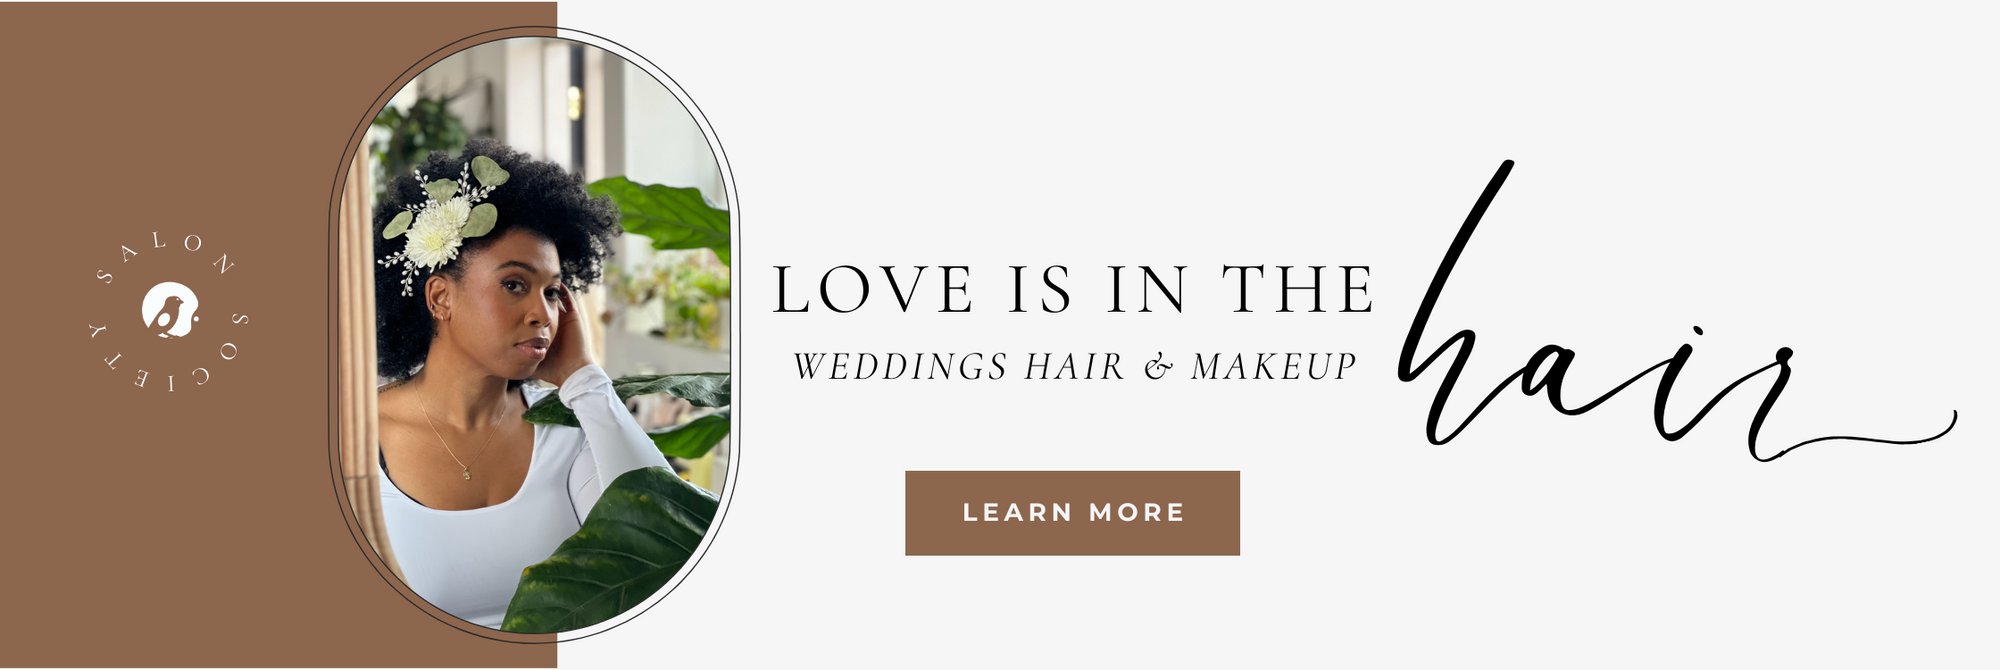 Love is in the Hair - Weddings Hair & Makeup with Salon Society - Click to Learn More